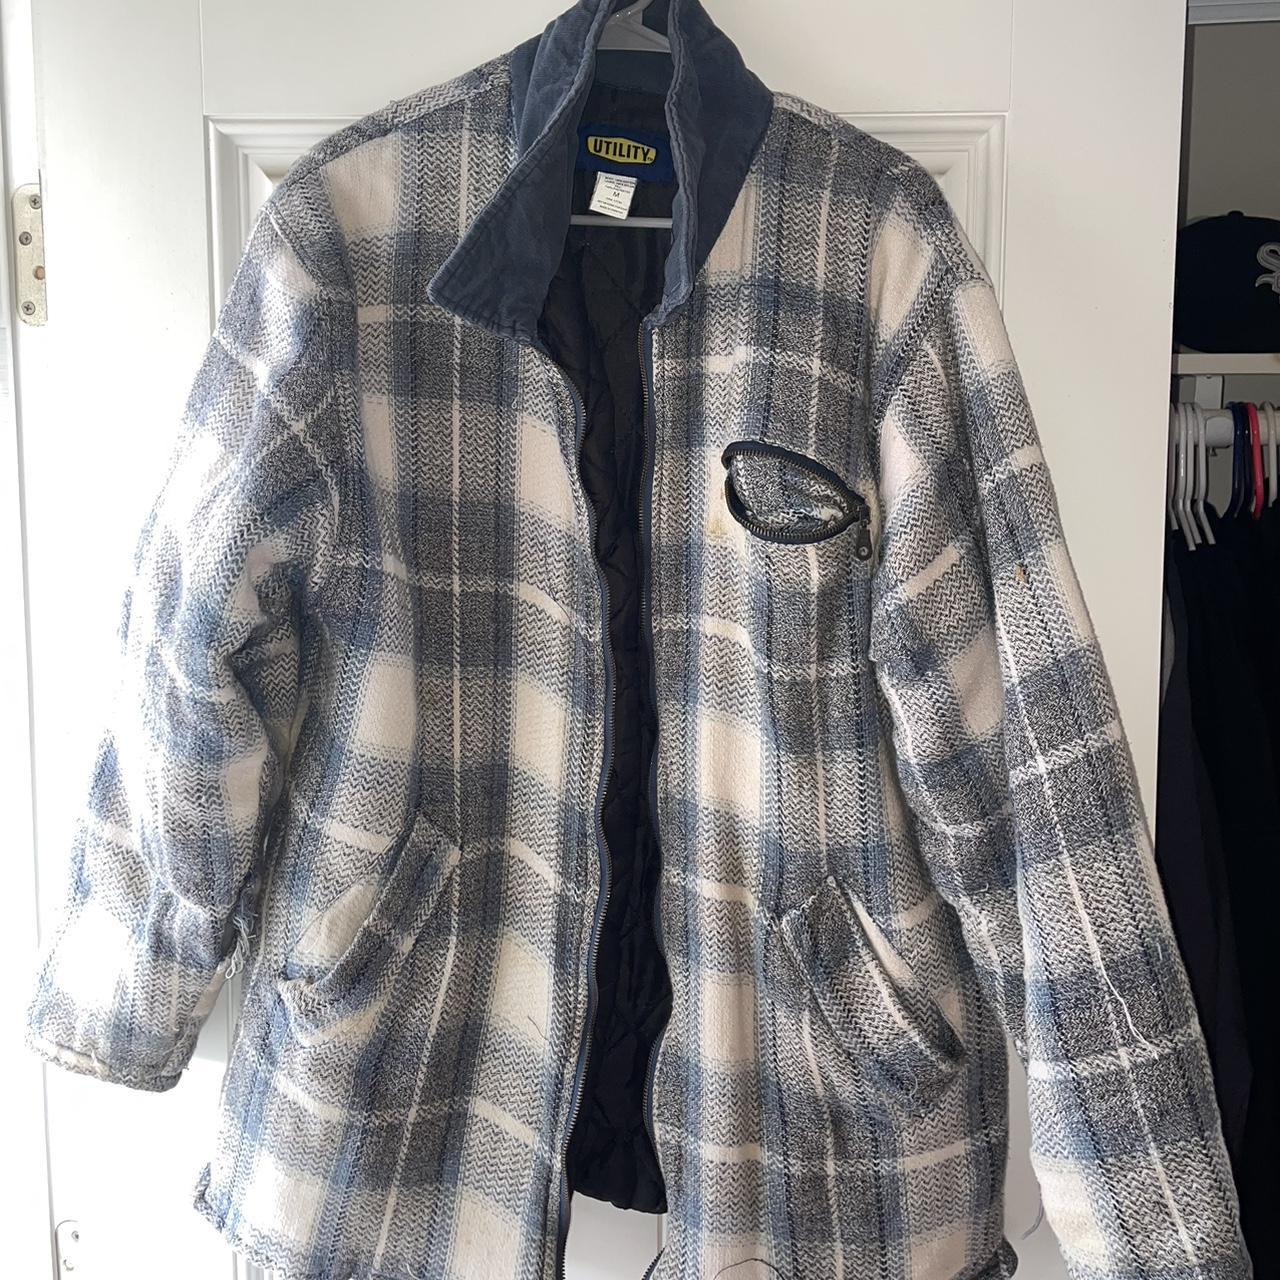 Utility Men's Blue and Silver Jacket